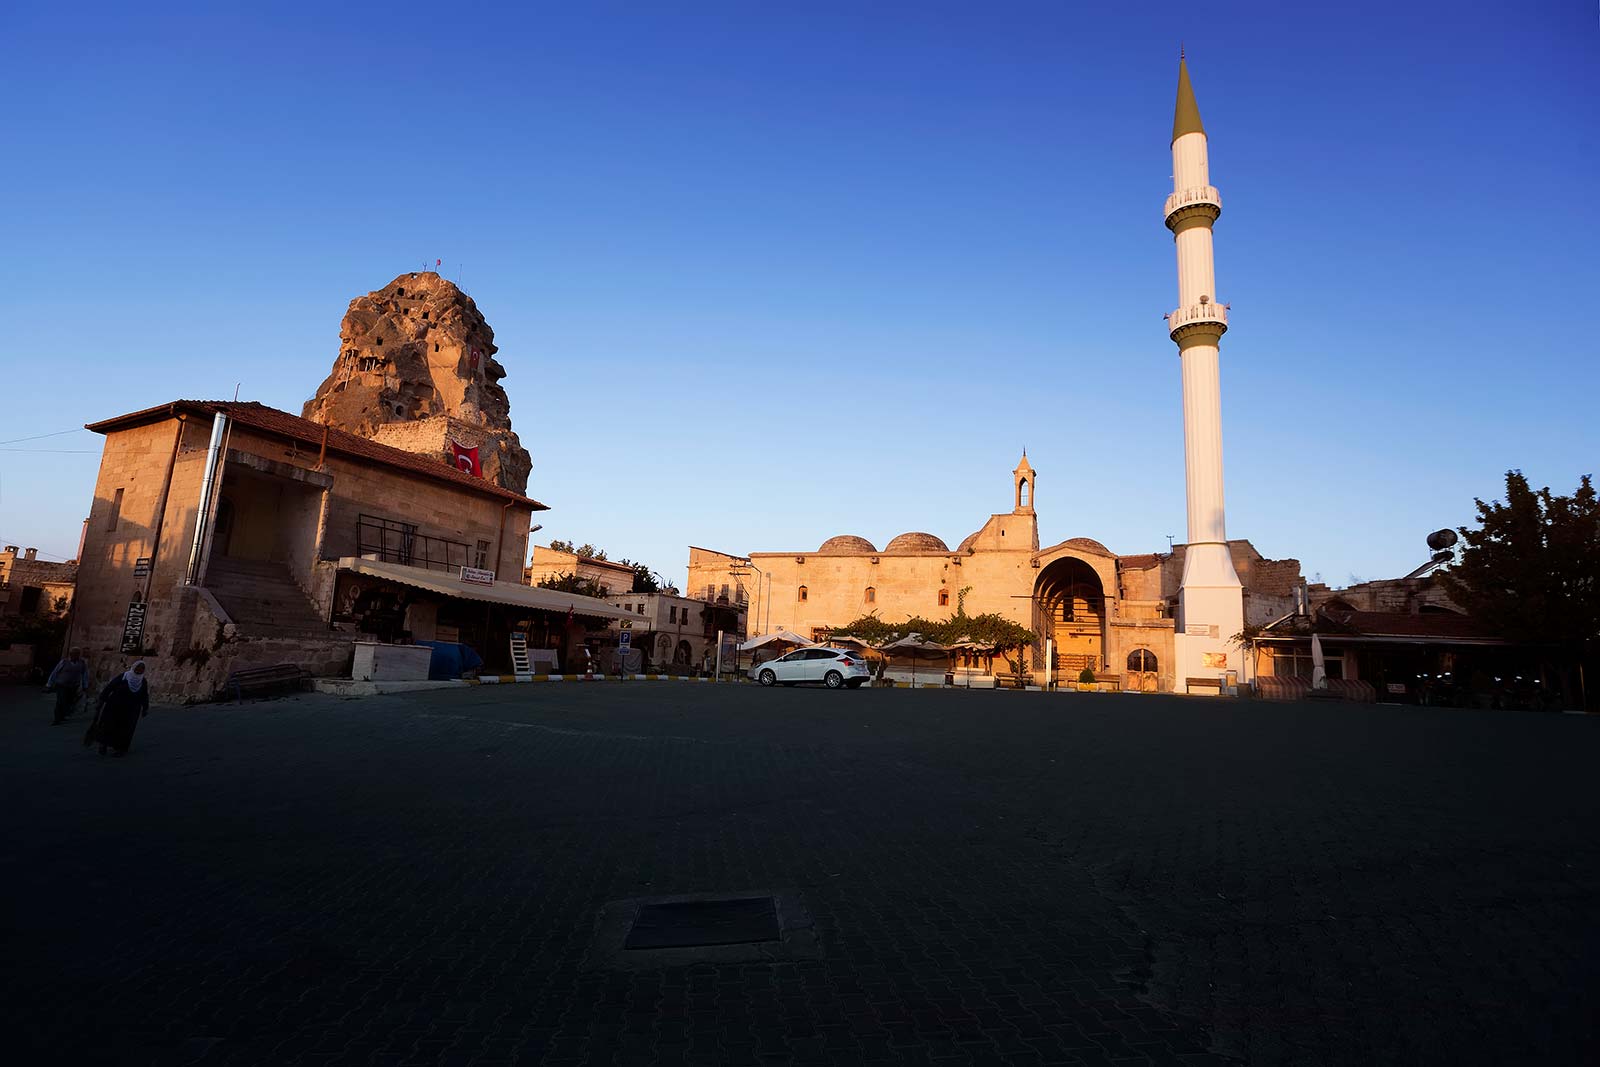 Ortahisar is known for its friendly people, picturesque stone houses, narrow streets and lovely churches as well as the castle-like rock formation after which the town is named.